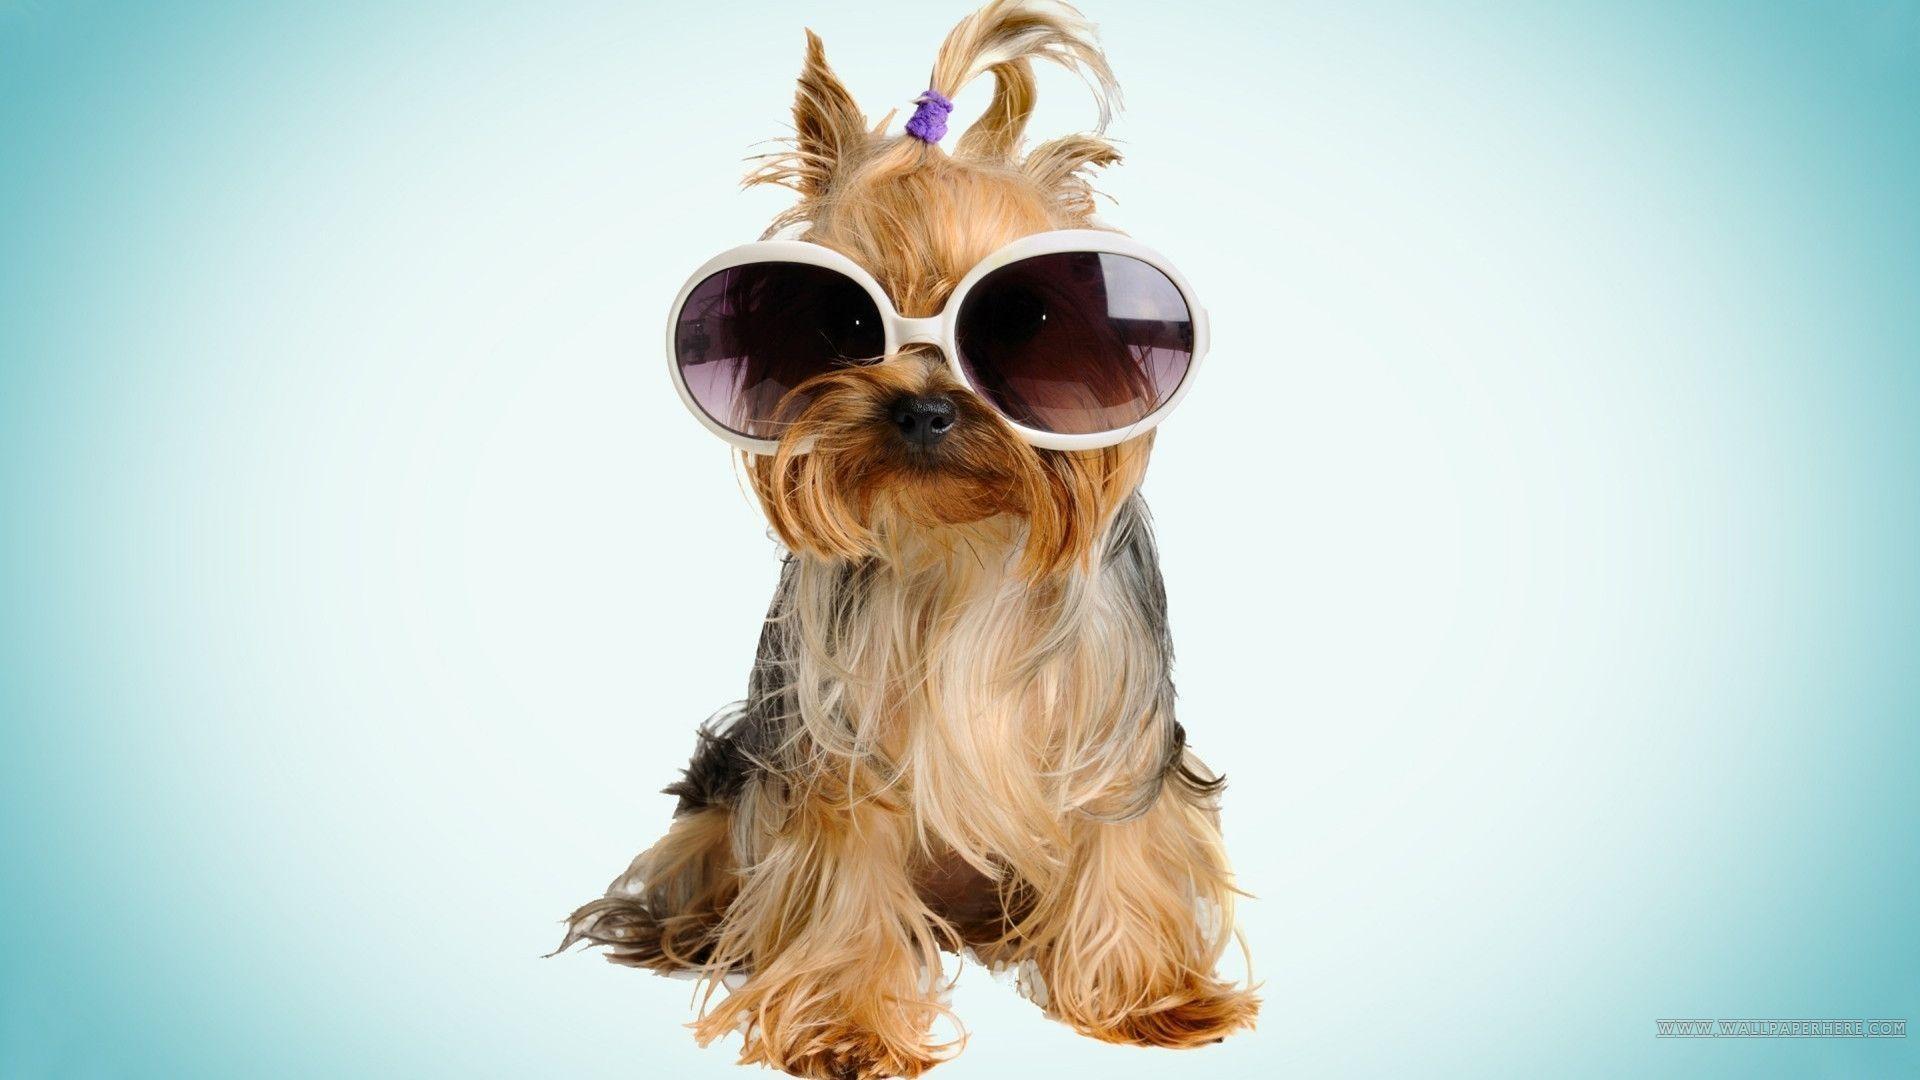 Cool Dog Backgrounds - Wallpaper Cave